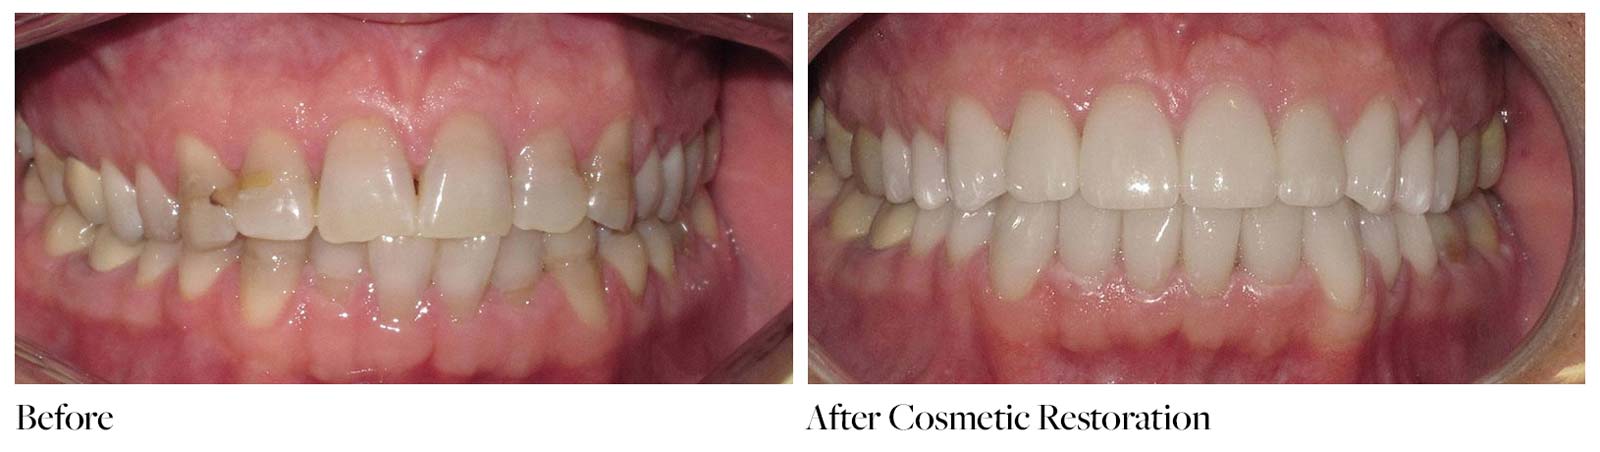 Before and after cosmetic restoration teeth